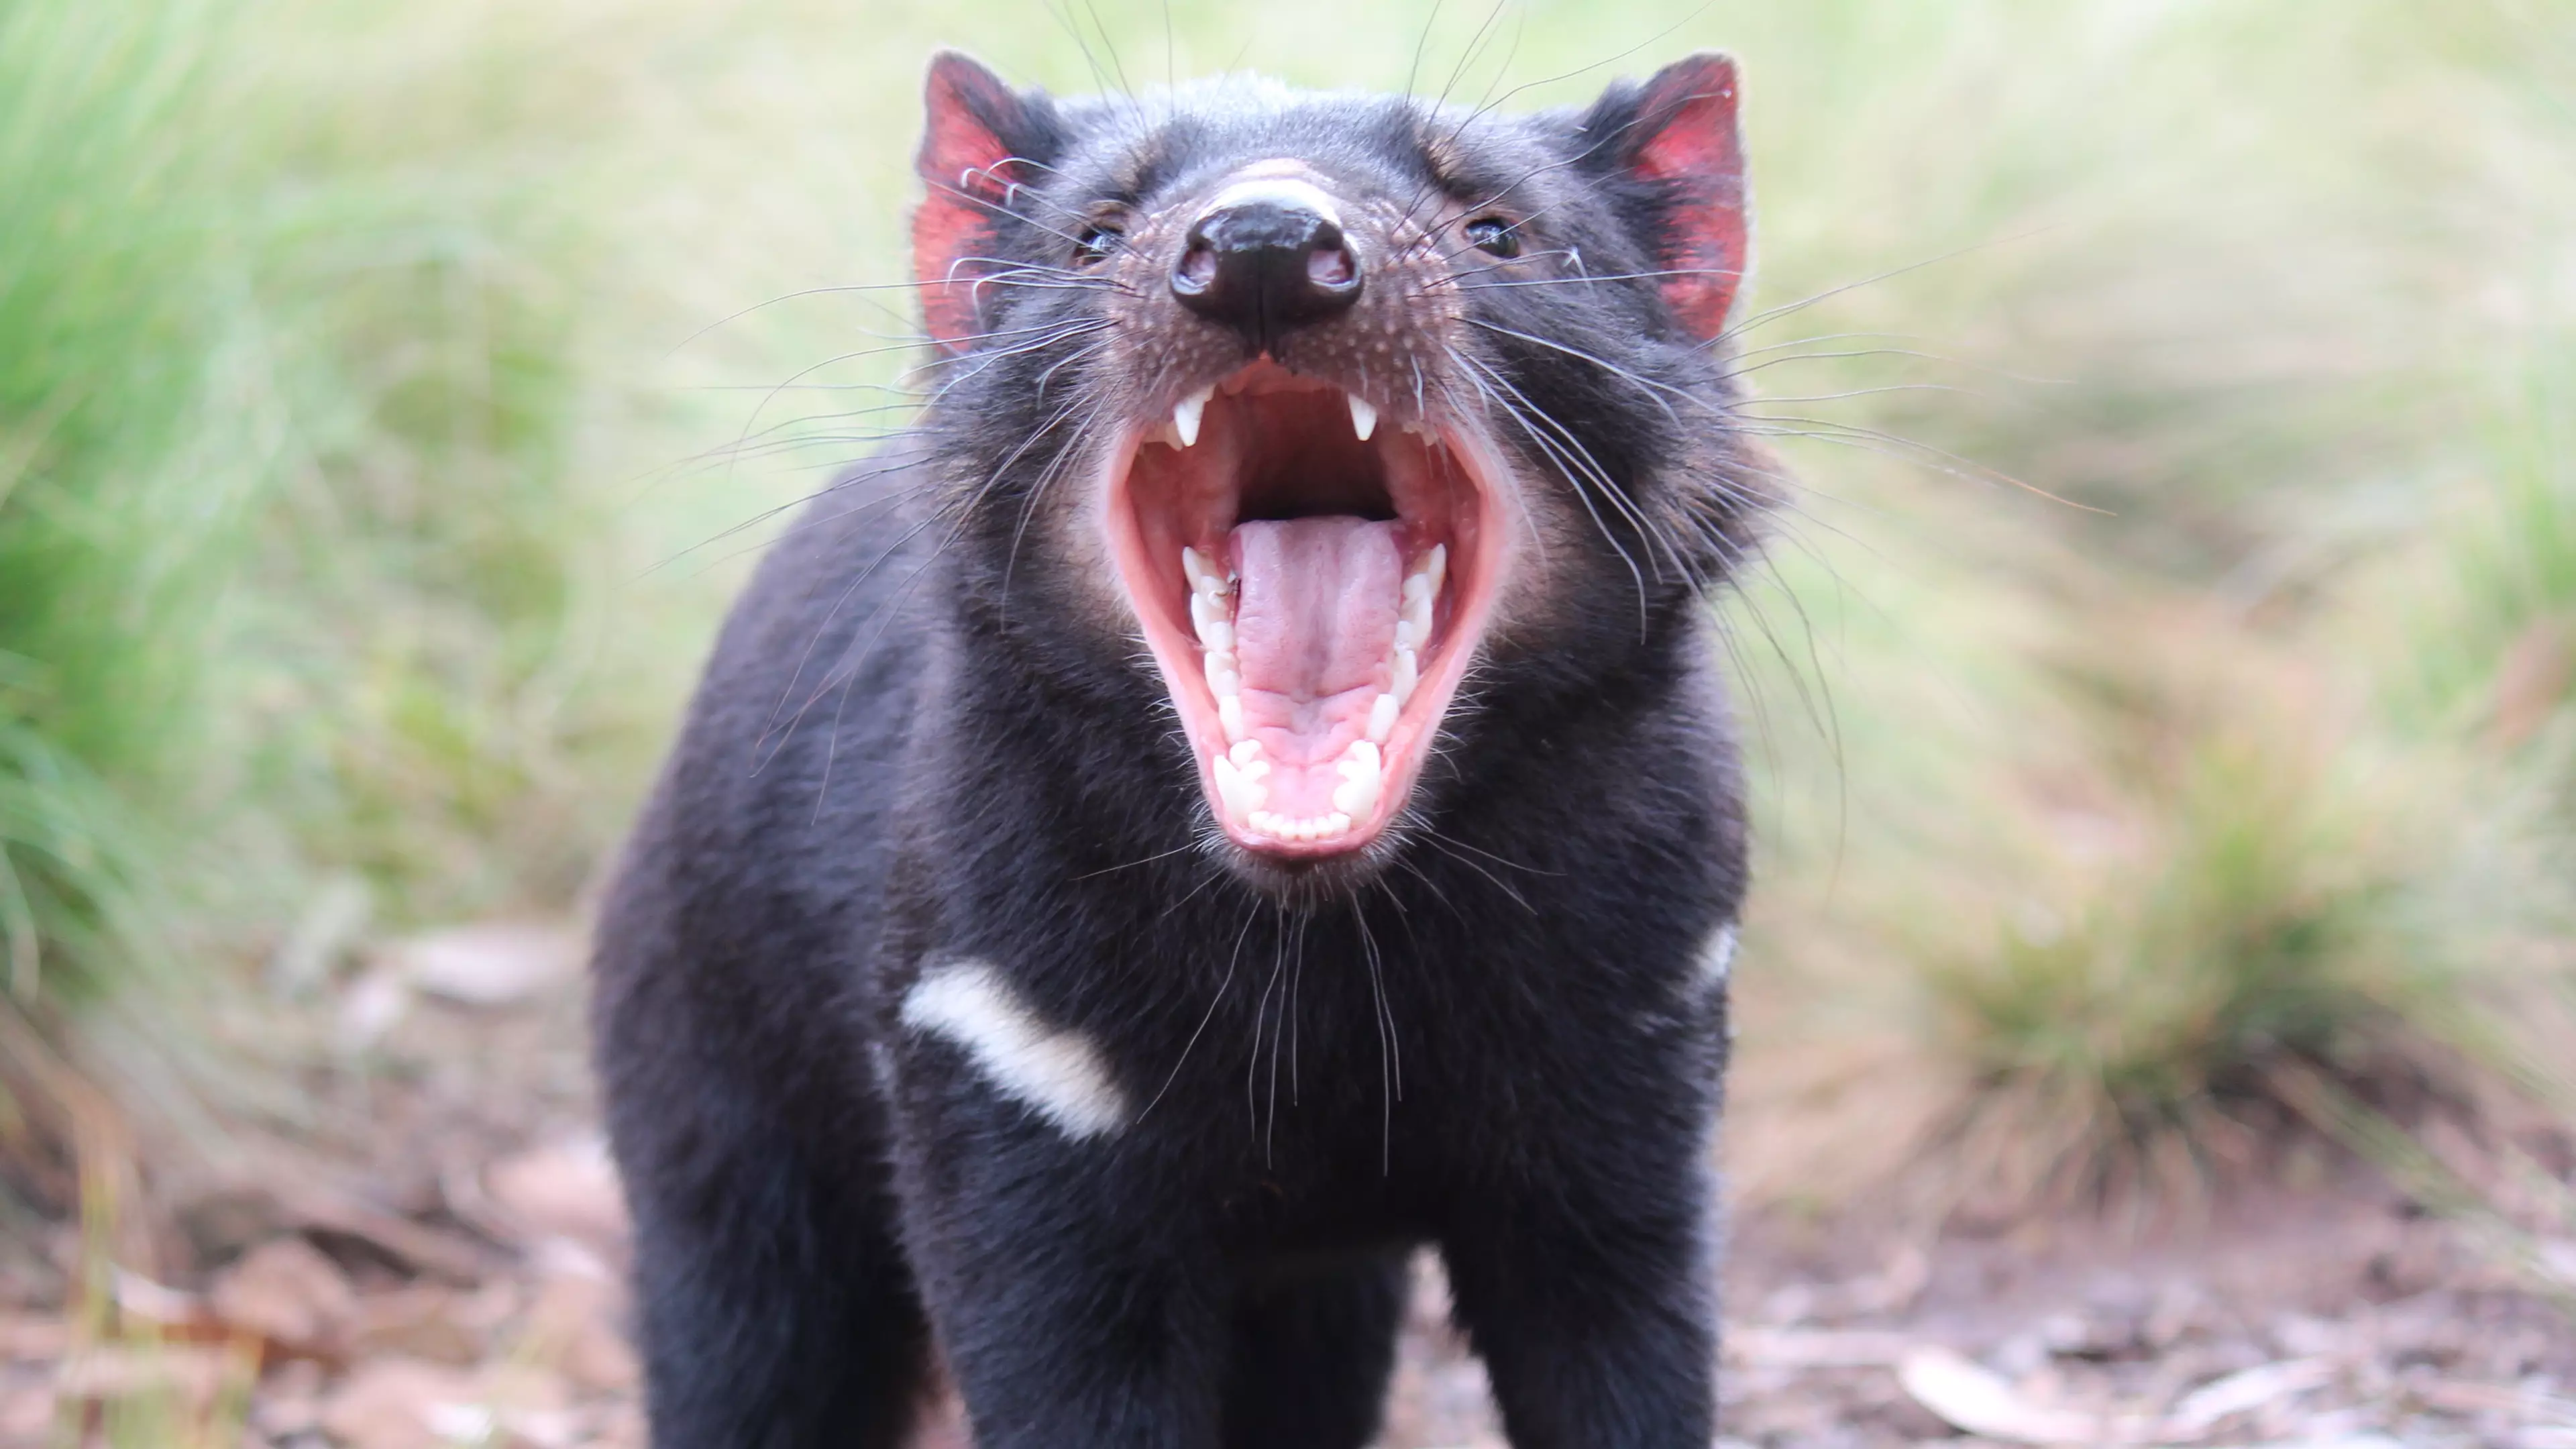 Tasmanian Devils Return To Mainland Australia For First Time In 3,000 Years